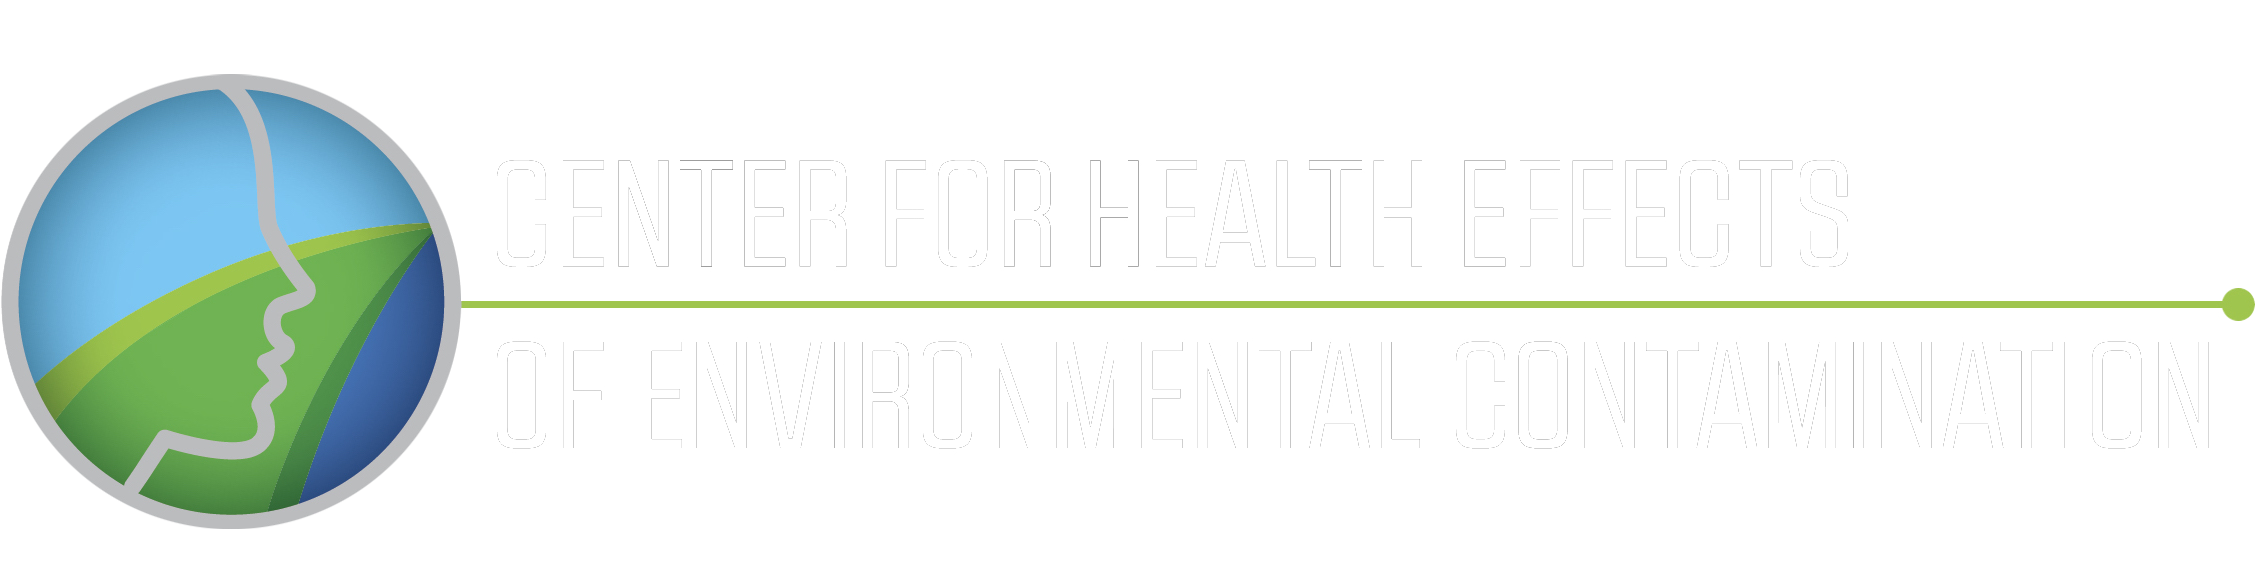 Center for Health Effects of Environmental Contaminants